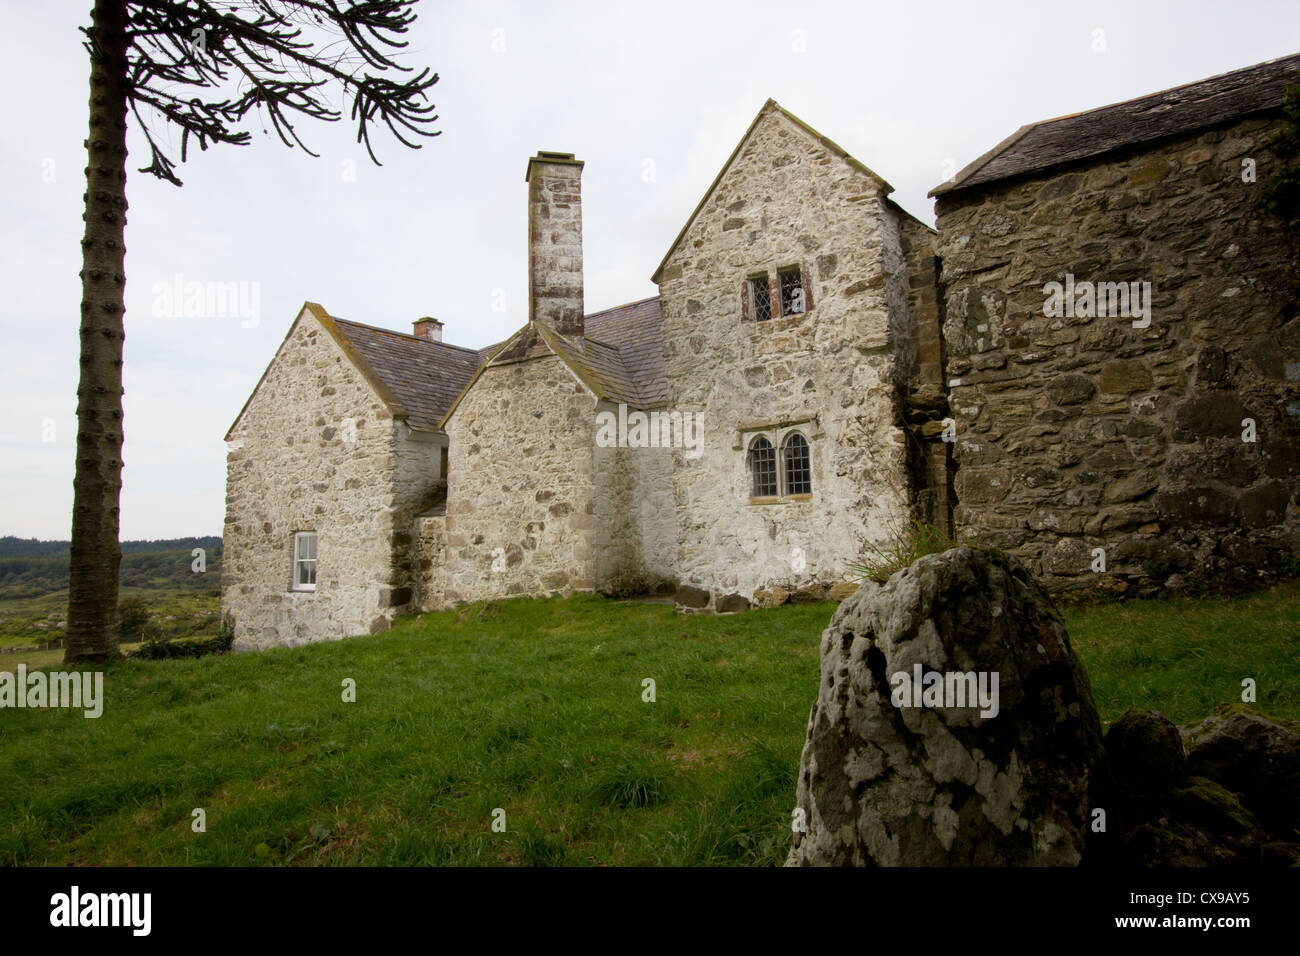 Hafoty, a mediaeval hall mansion near Llansadwrn, Anglesey. The house is owned by CADW and is rarely open to the publc. Stock Photo